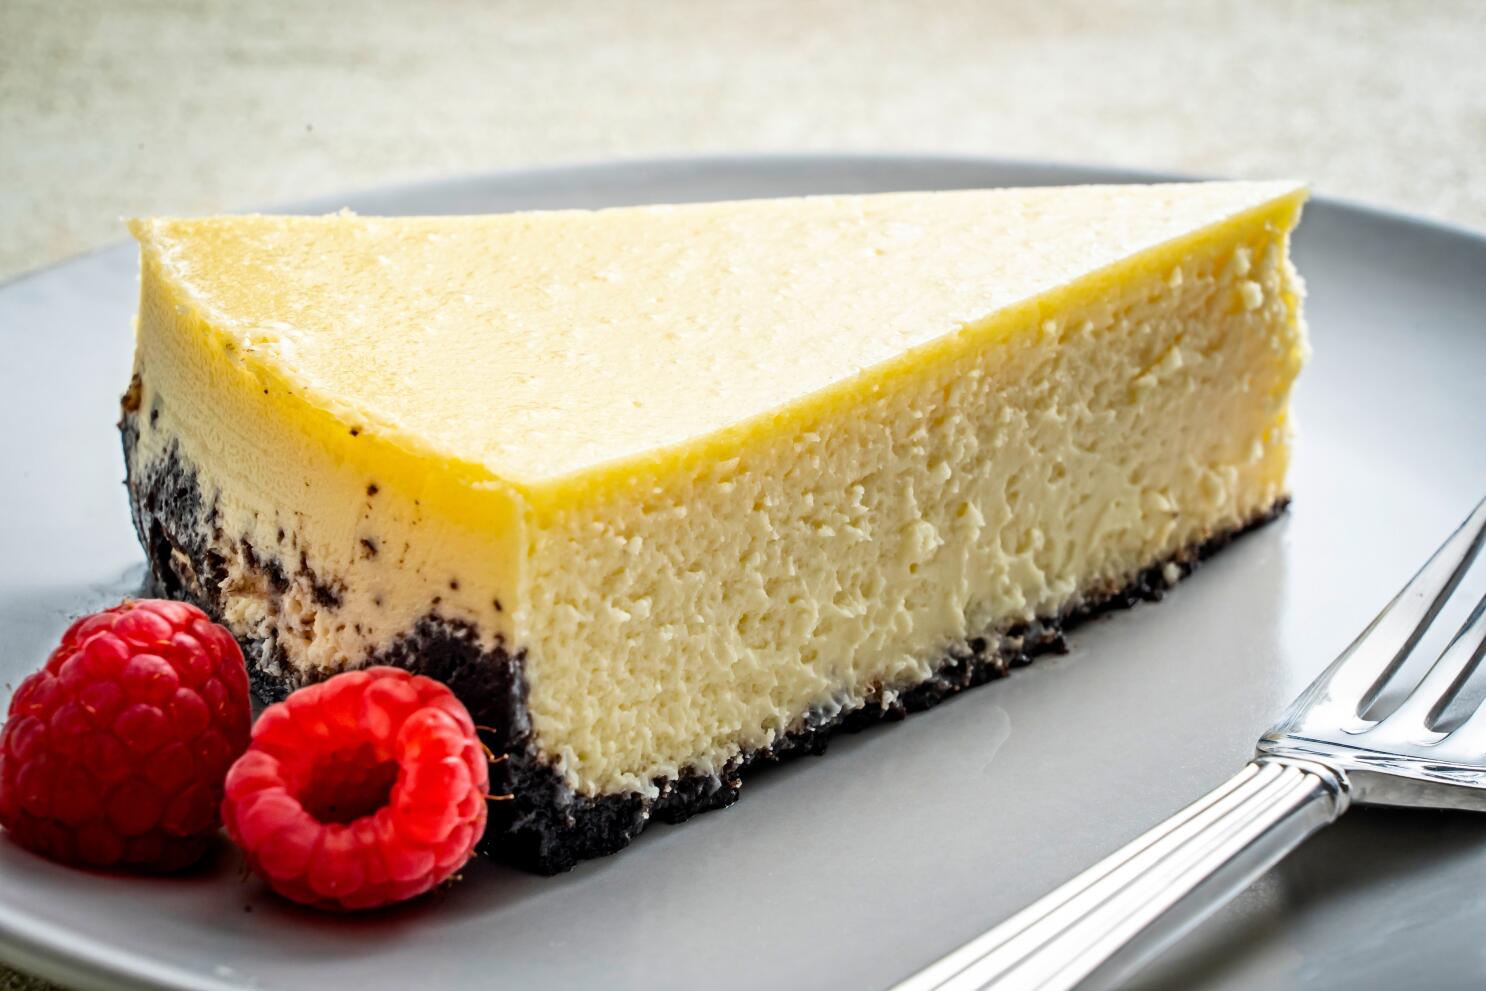 Cheesecake Troubleshooting - Bake from Scratch